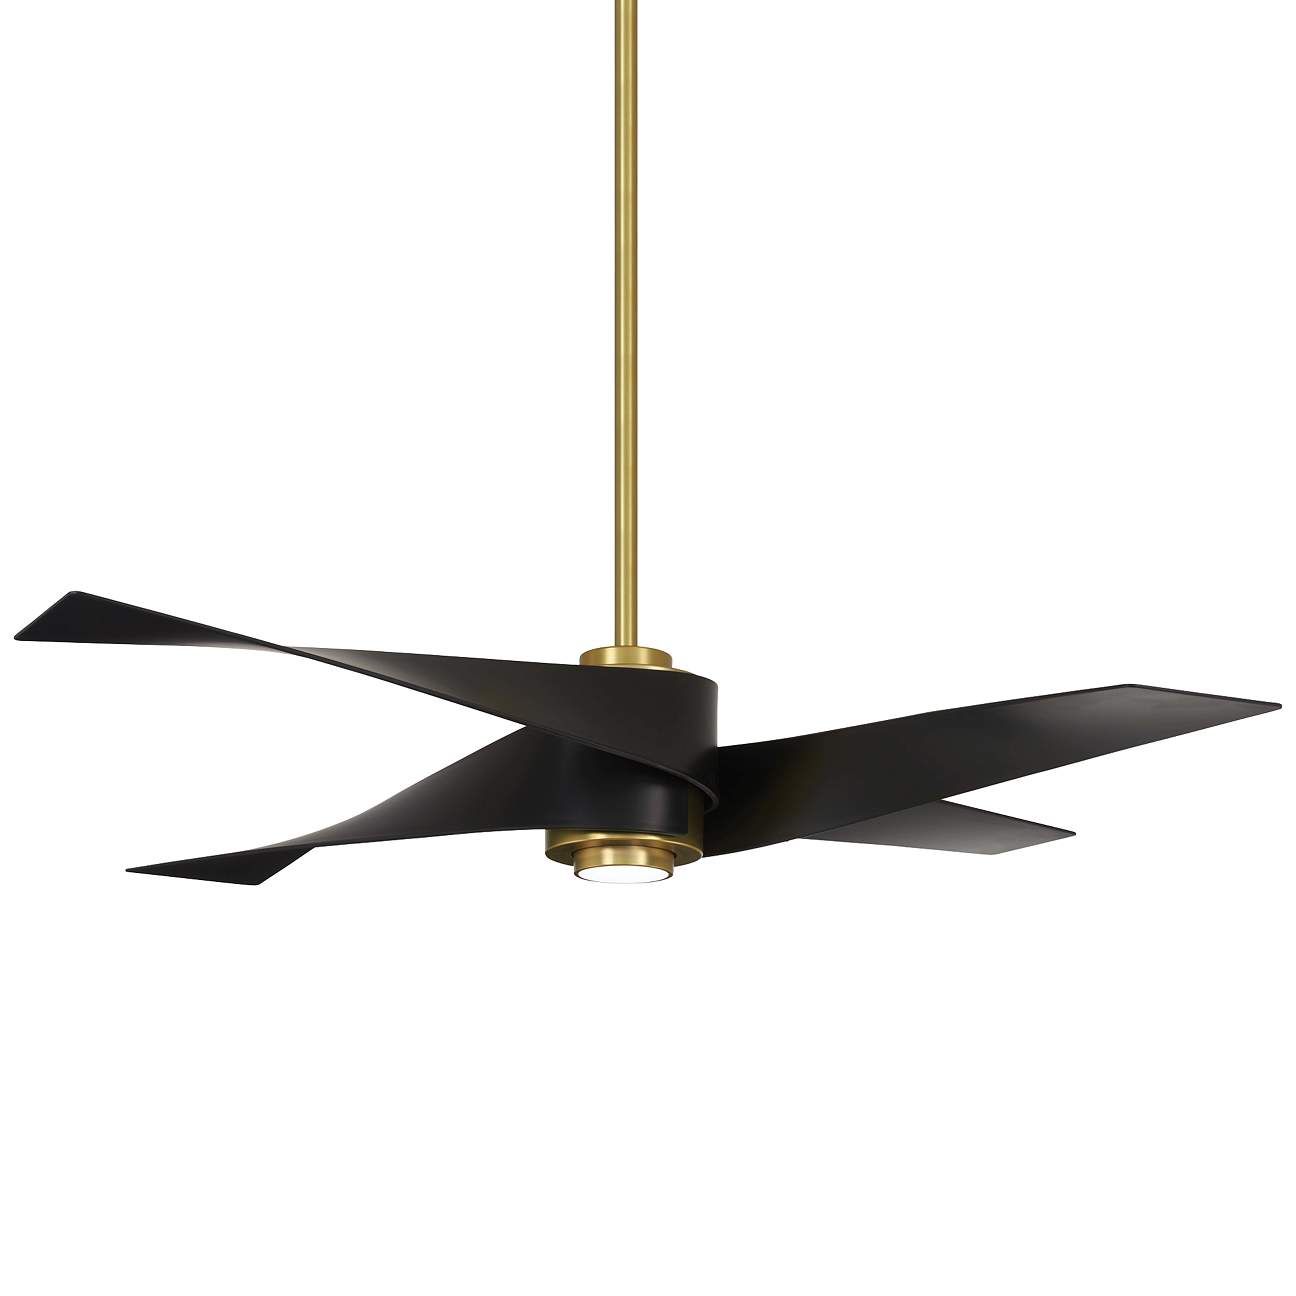 64" Artemis IV Soft Brass DC Large Modern Fan with Remote Control | Lamps Plus